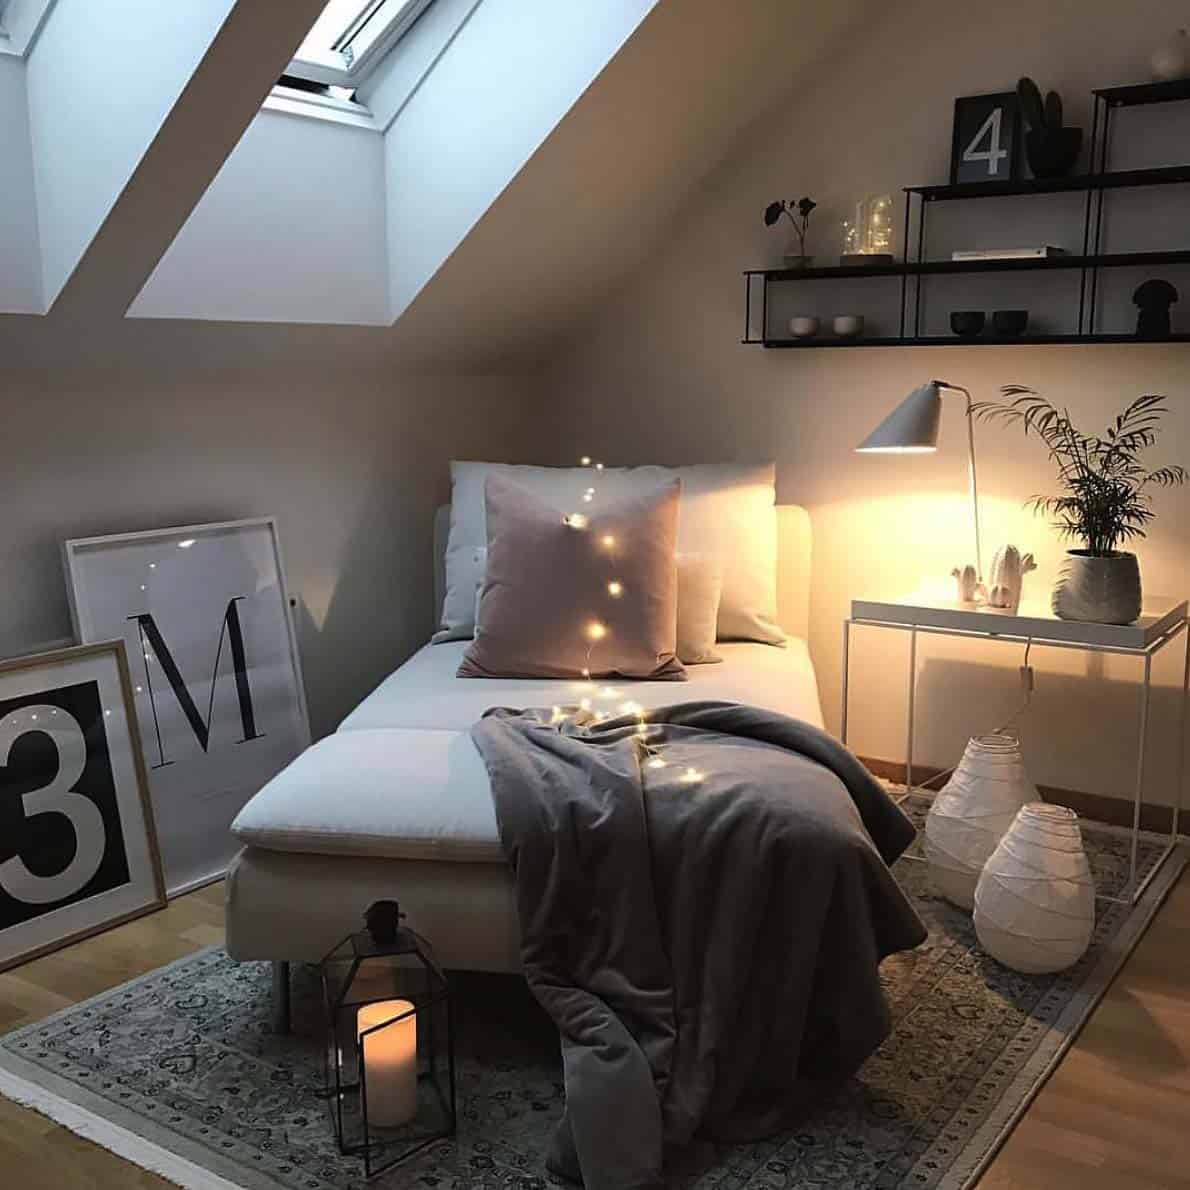 Cozy Bedroom Decorating Ideas For Winter-24-1 Kindesign